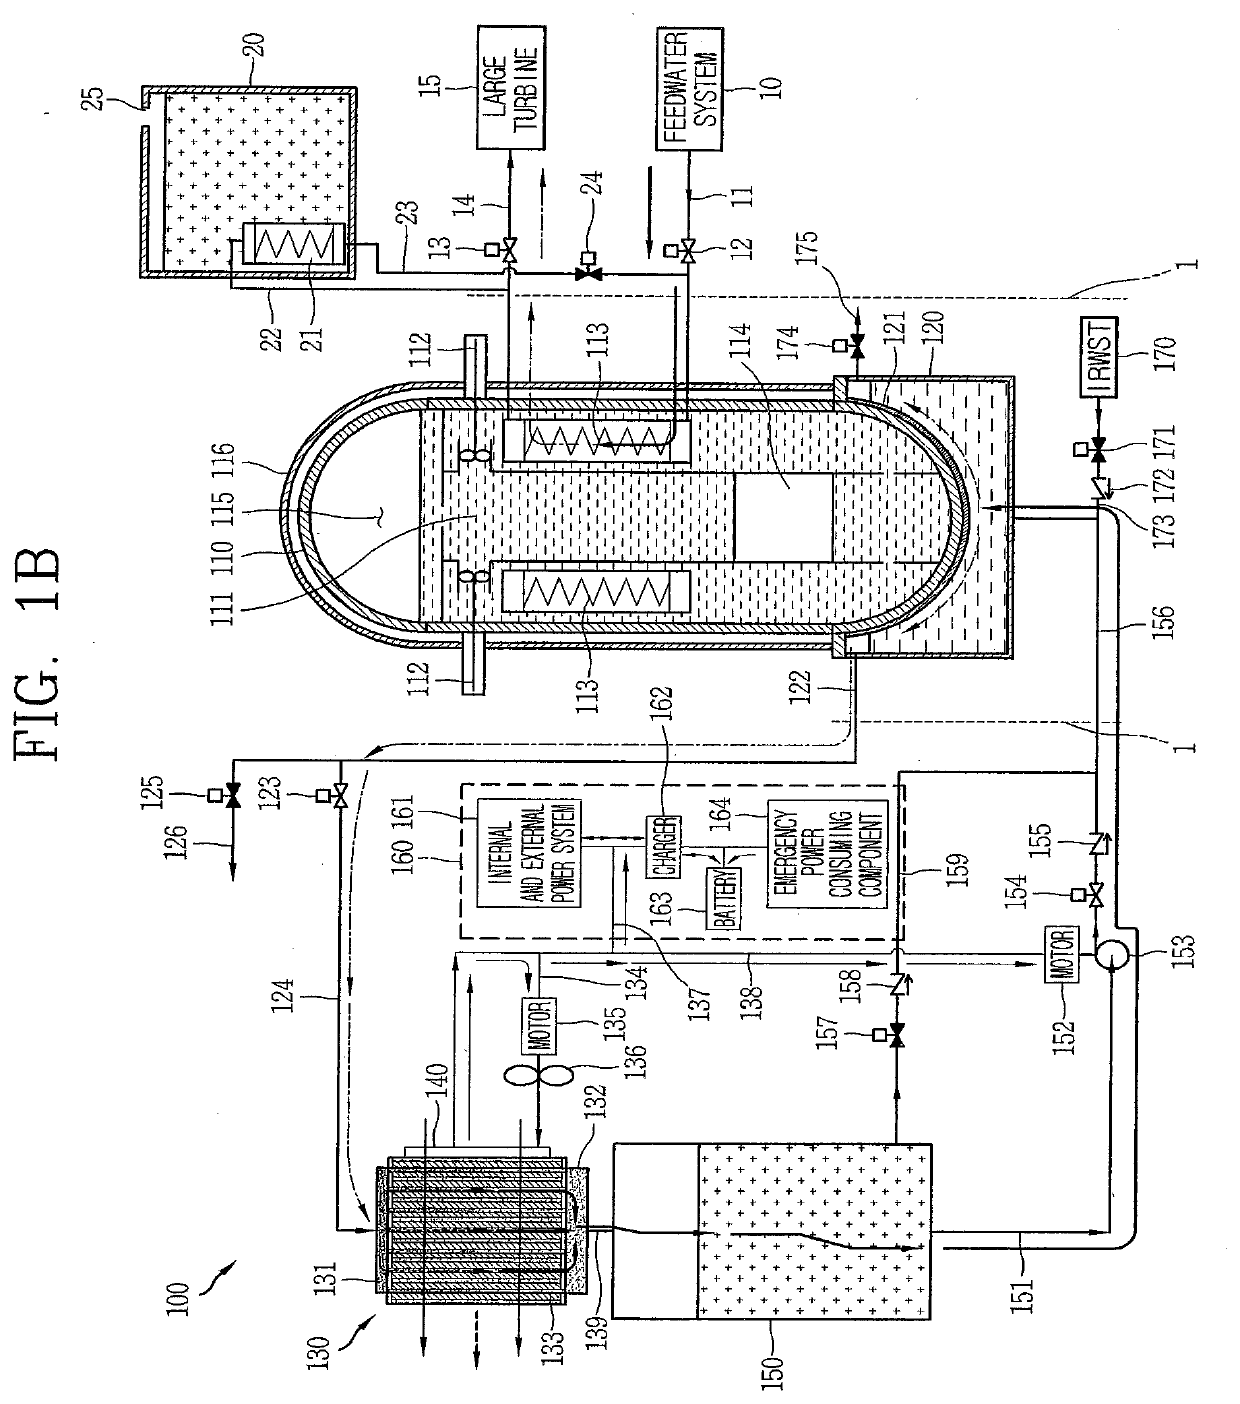 Reactor cooling and electric power generation system